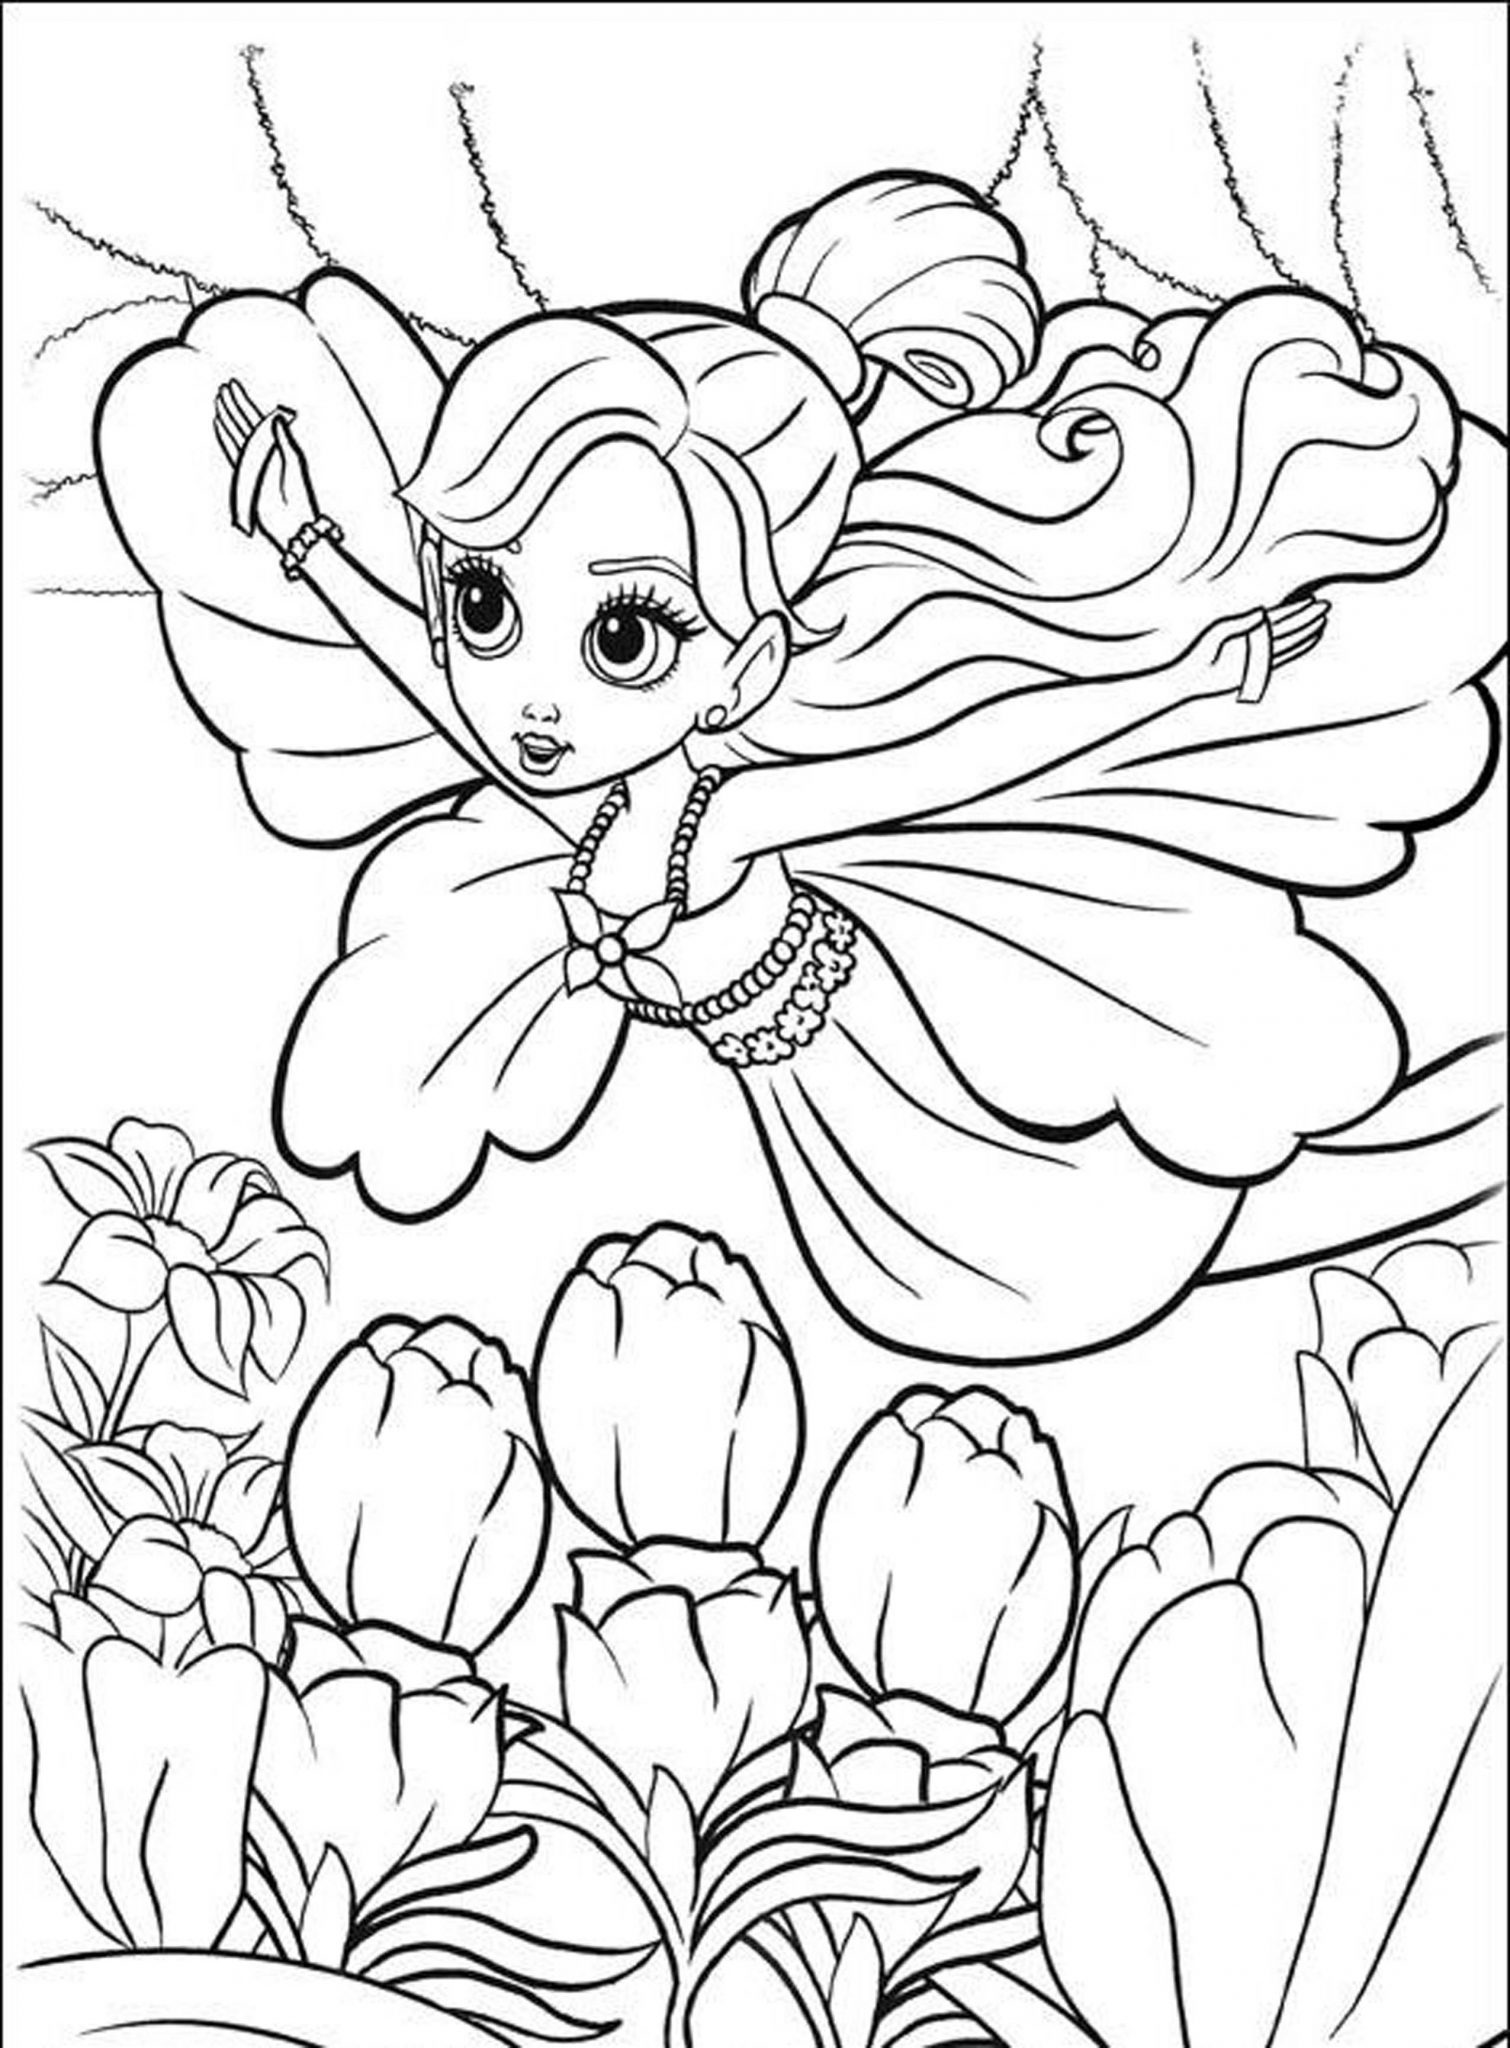 princess-coloring-pages-for-girls-bestappsforkids